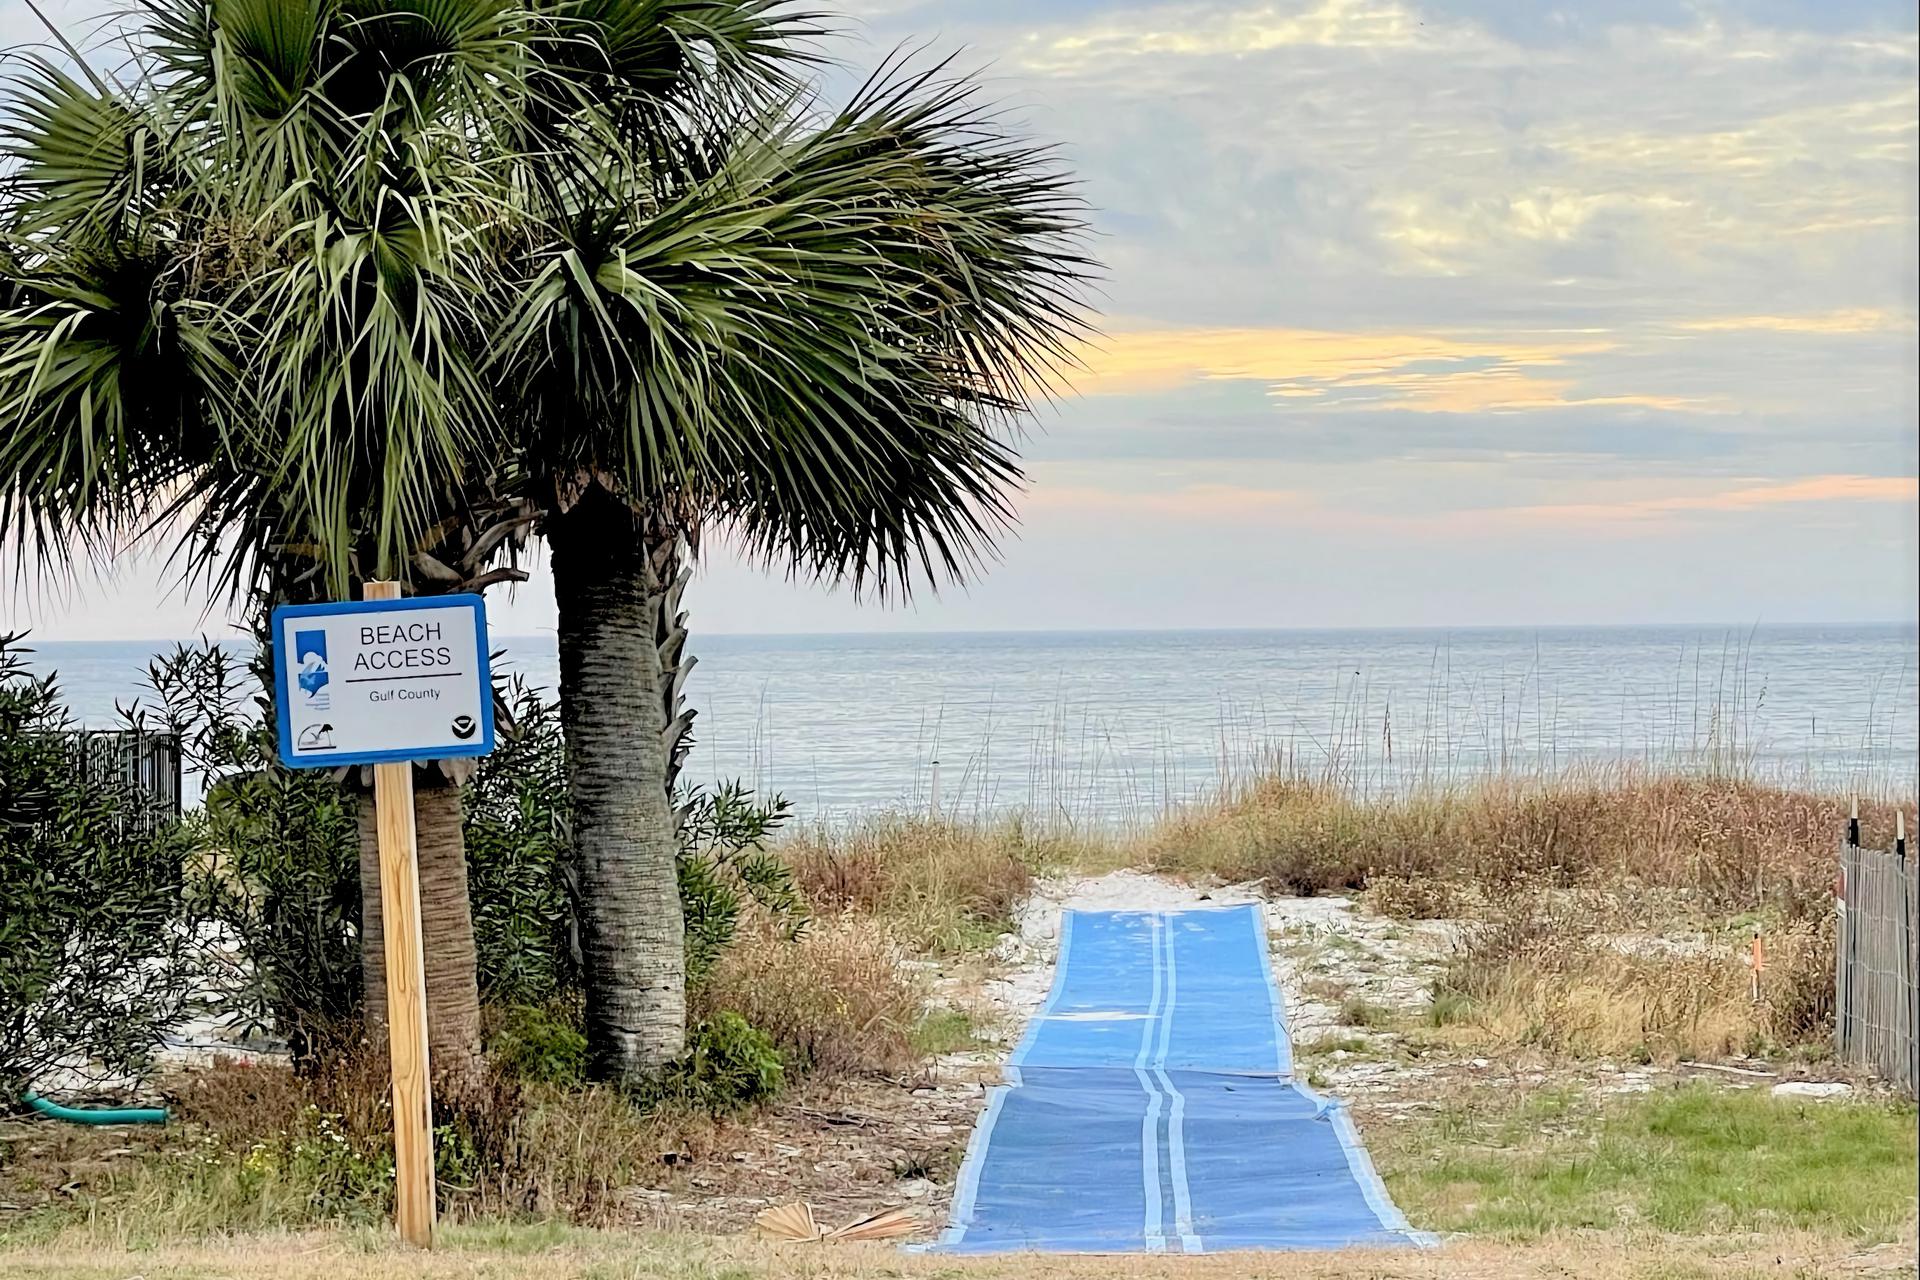 One of Two Public Access Paths to the Beach.